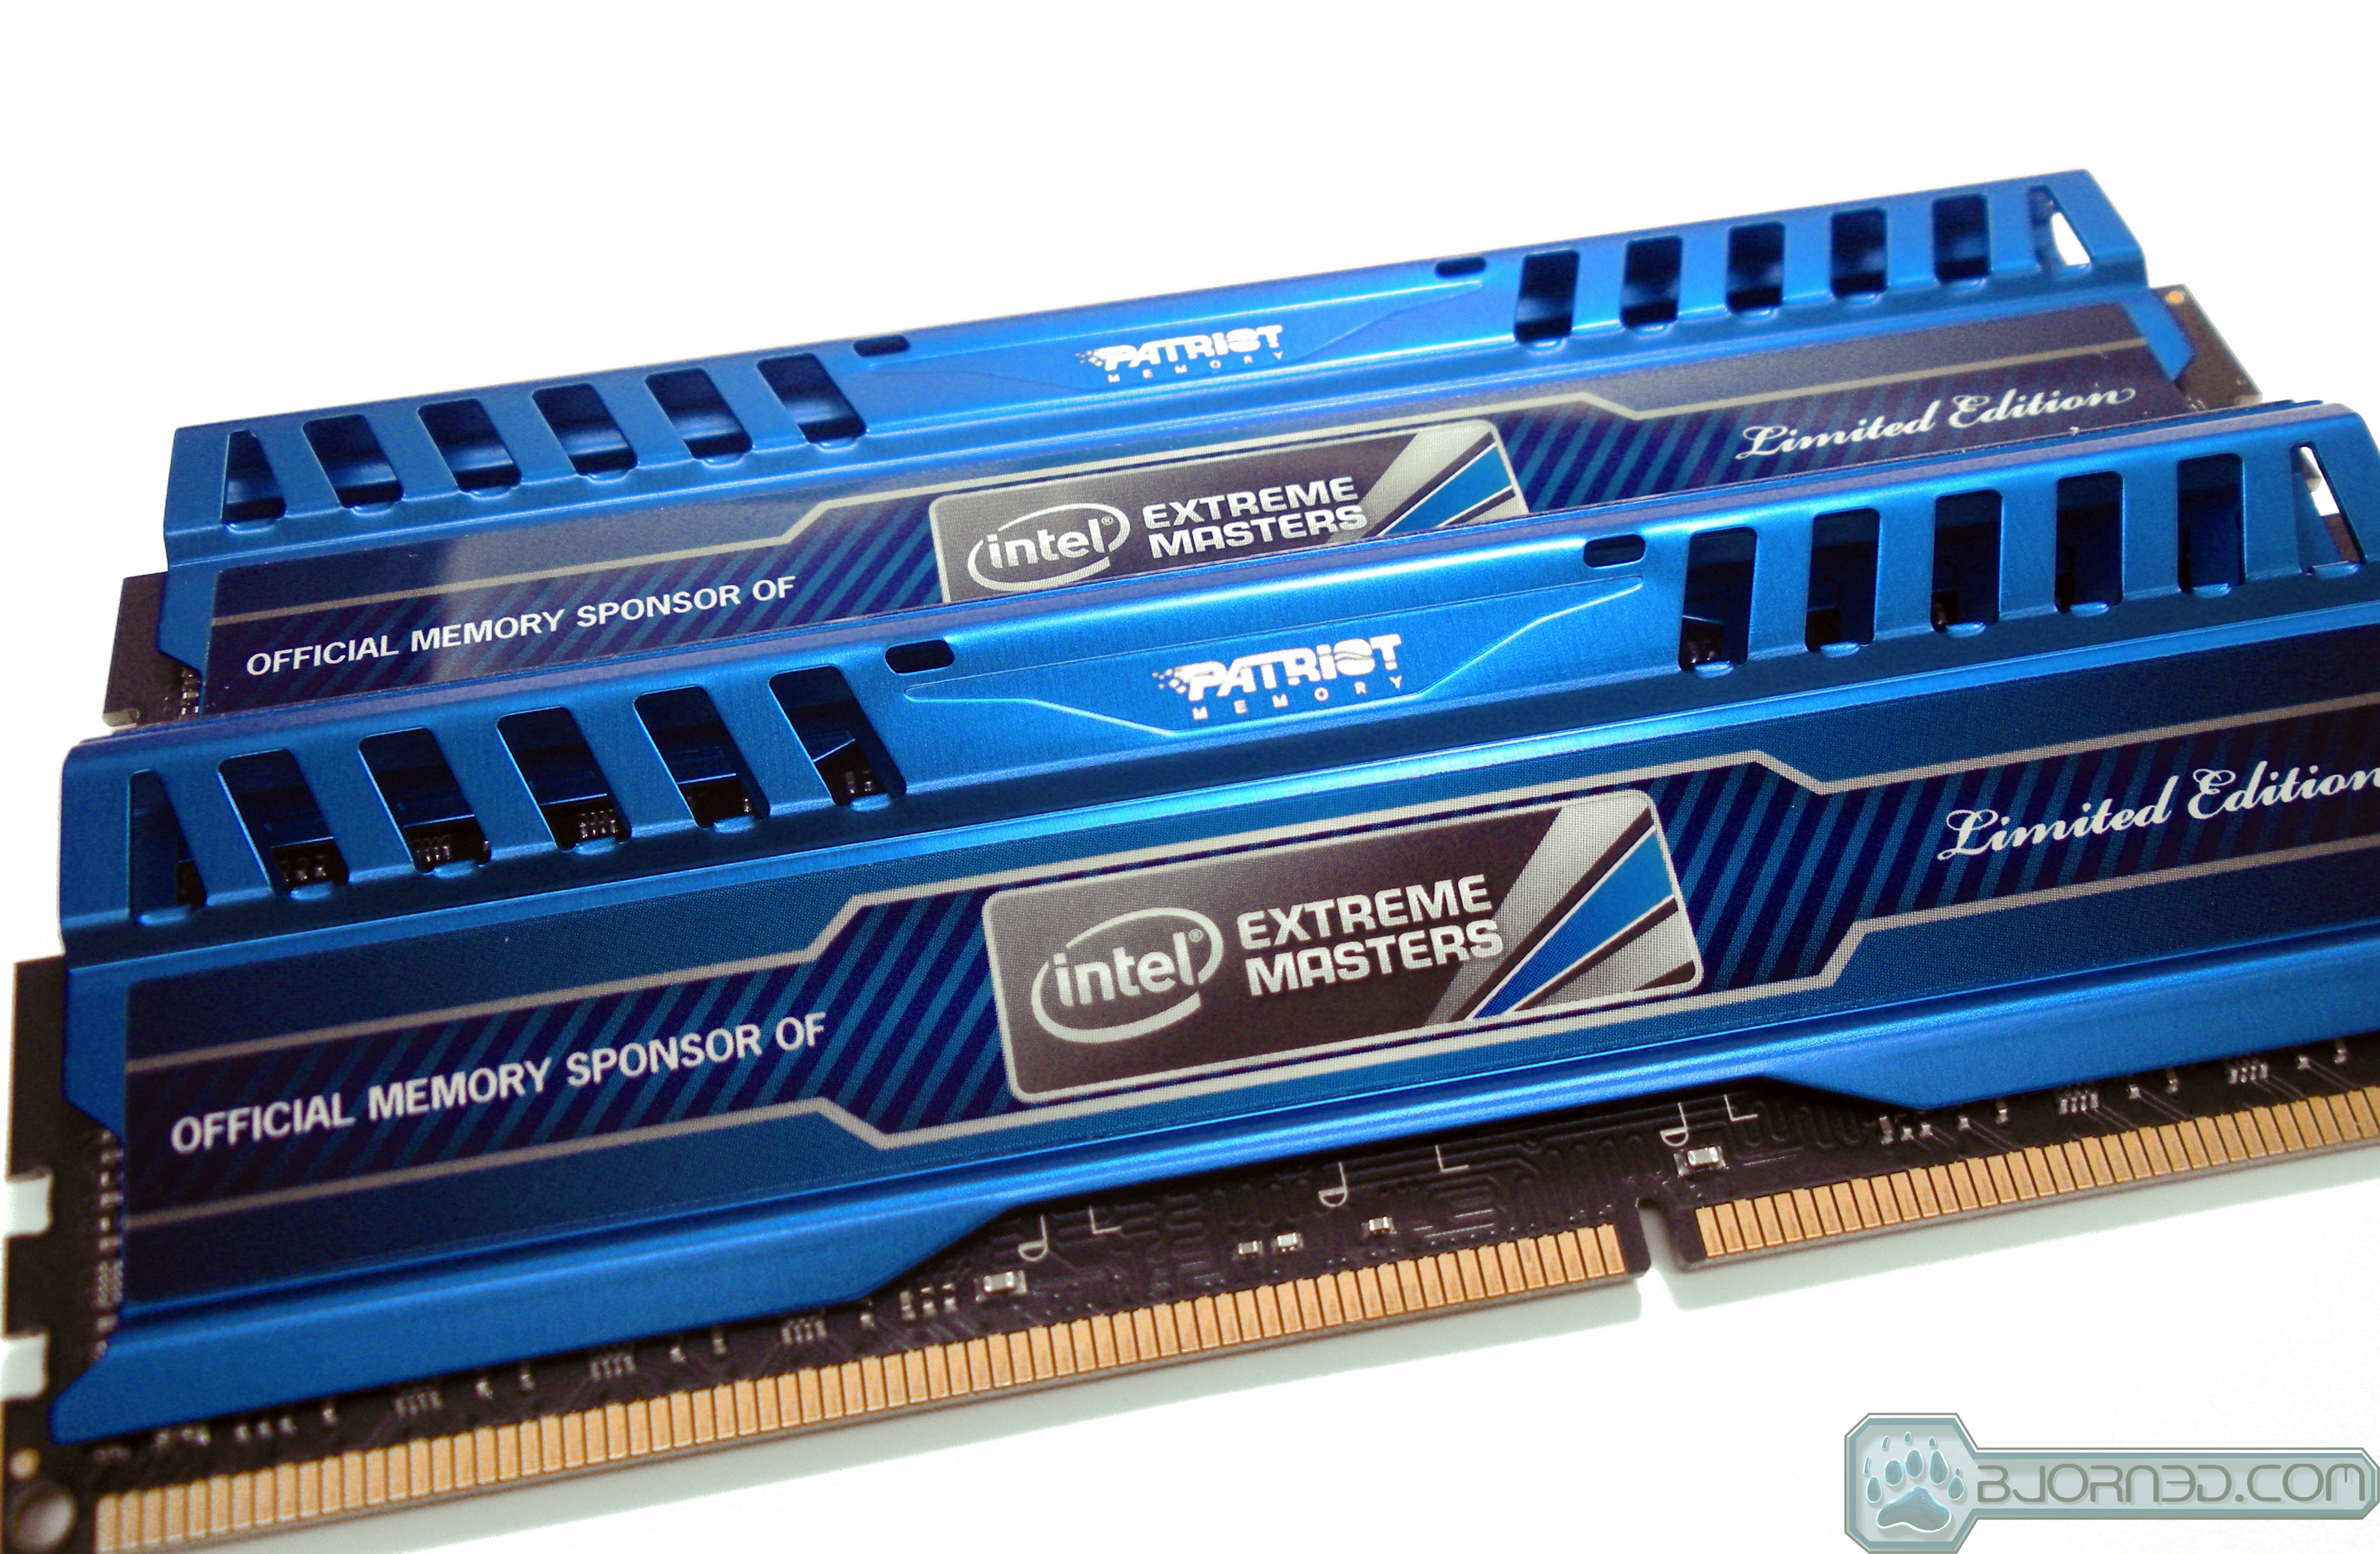 Patriot Intel Extreme Masters Limited Edition 32GB 1600MHz Review 